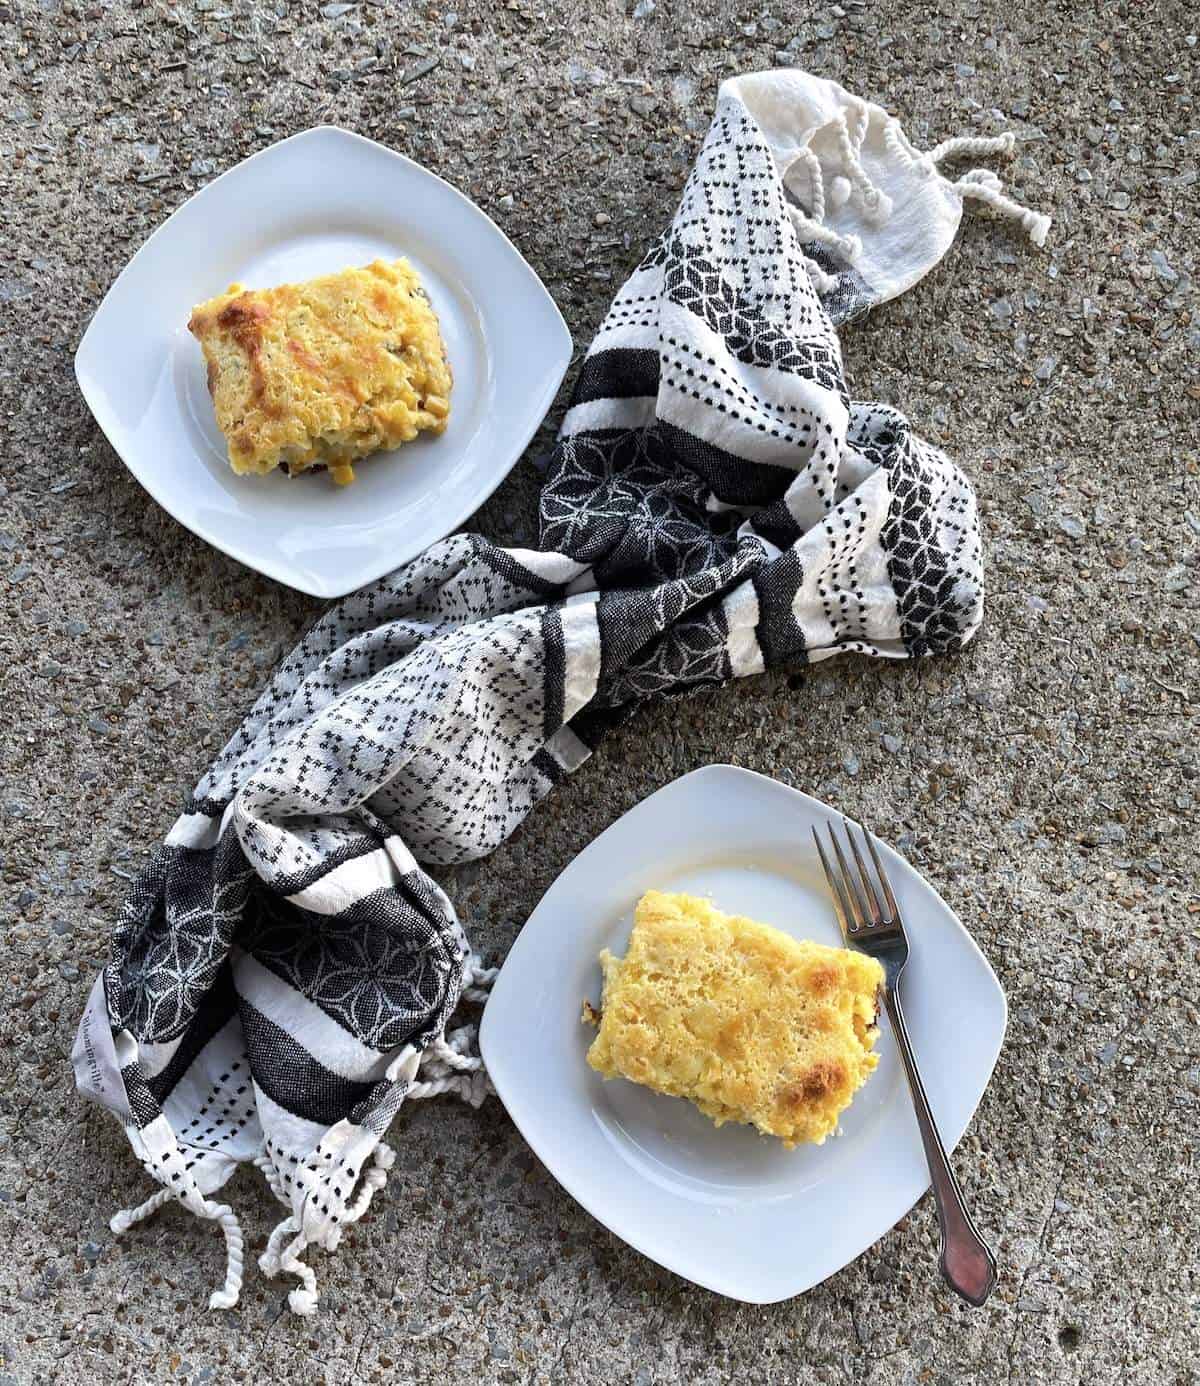 Two white plates with a square of corn pudding on each one and a tea towel.